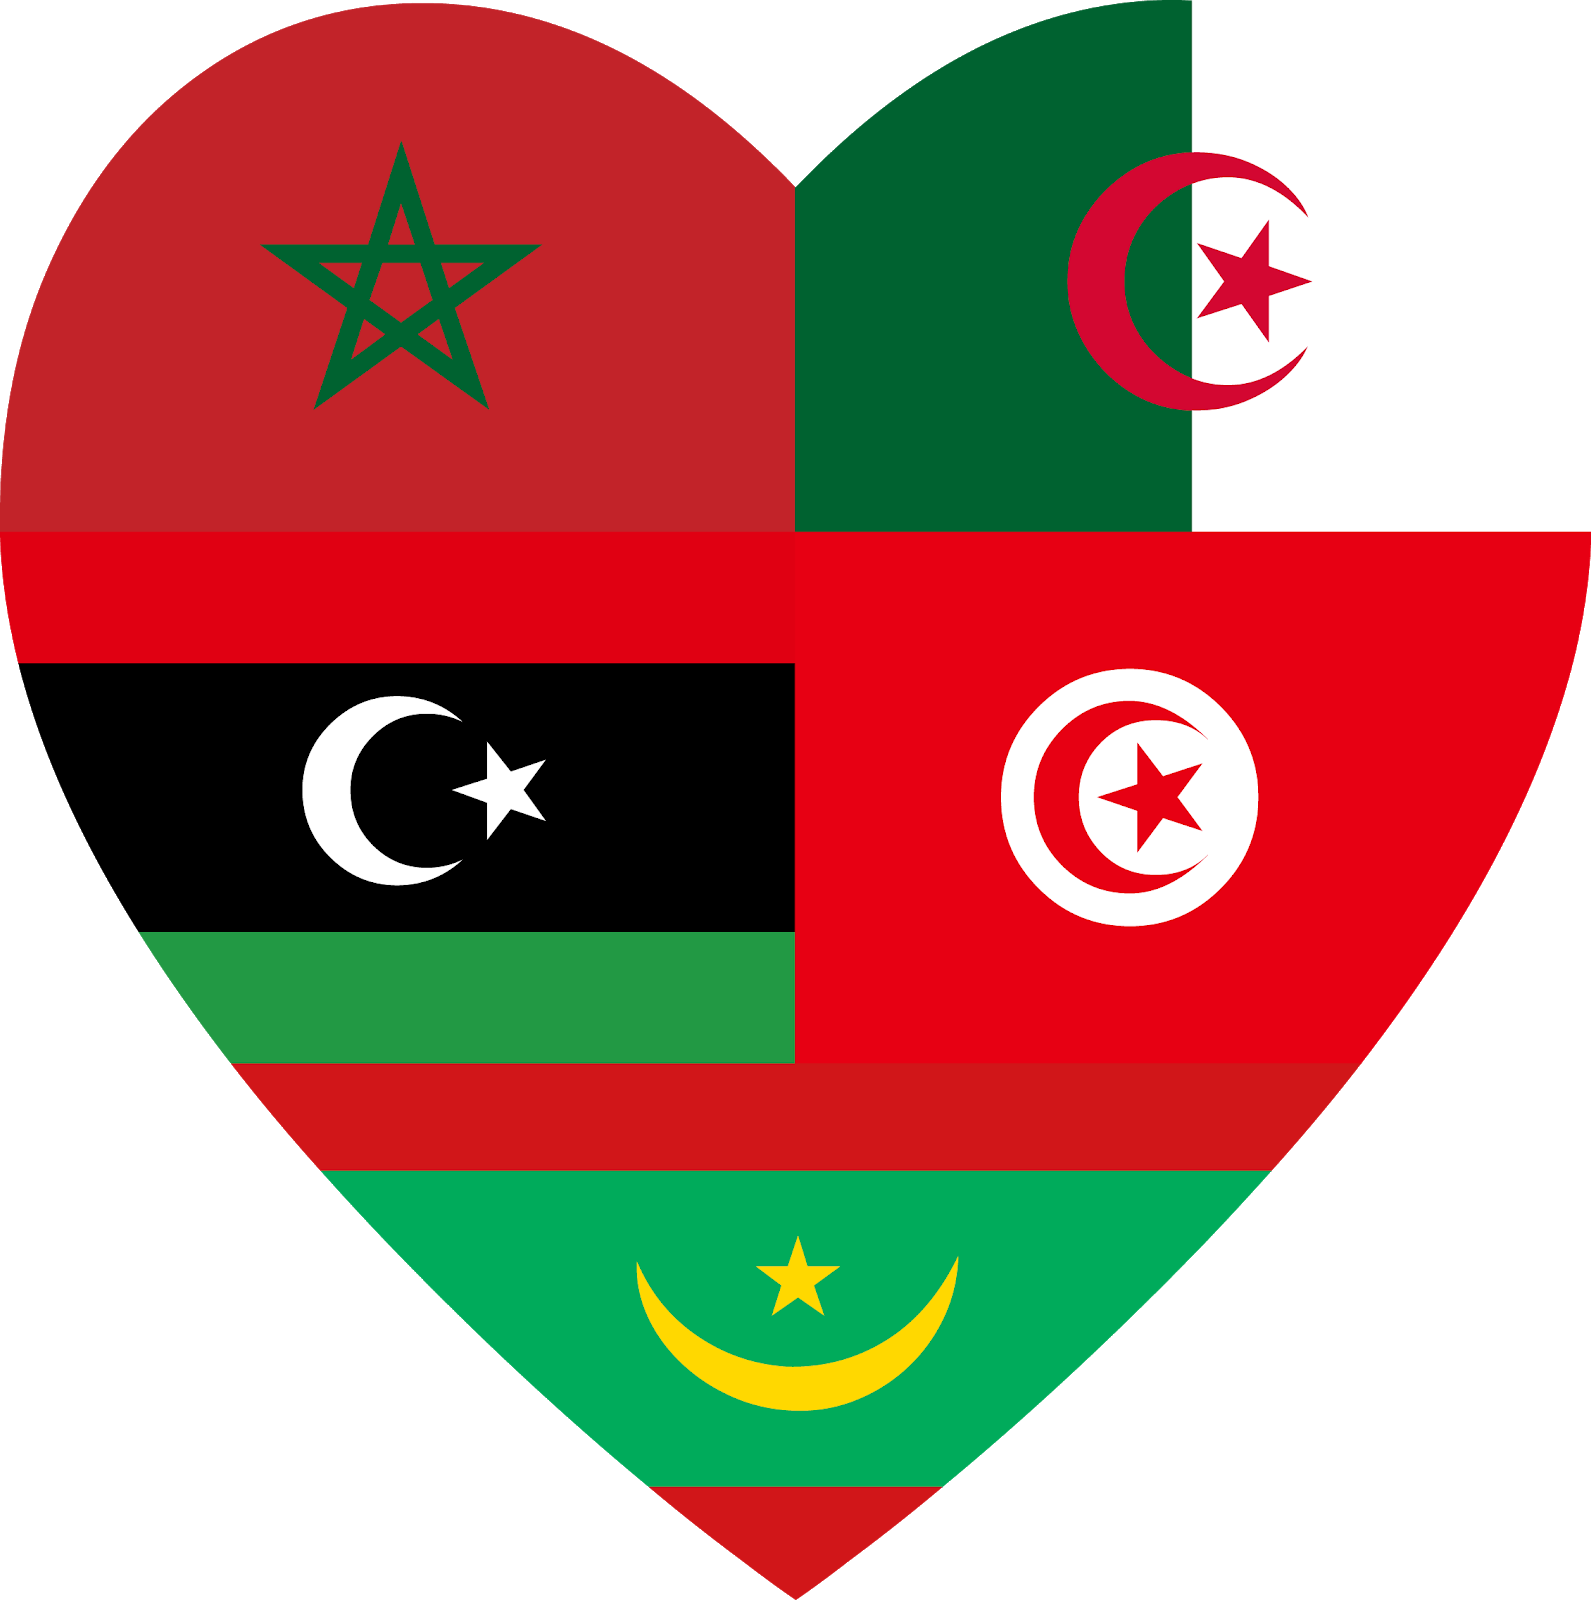 A Heart Shaped Flag With Different Colors